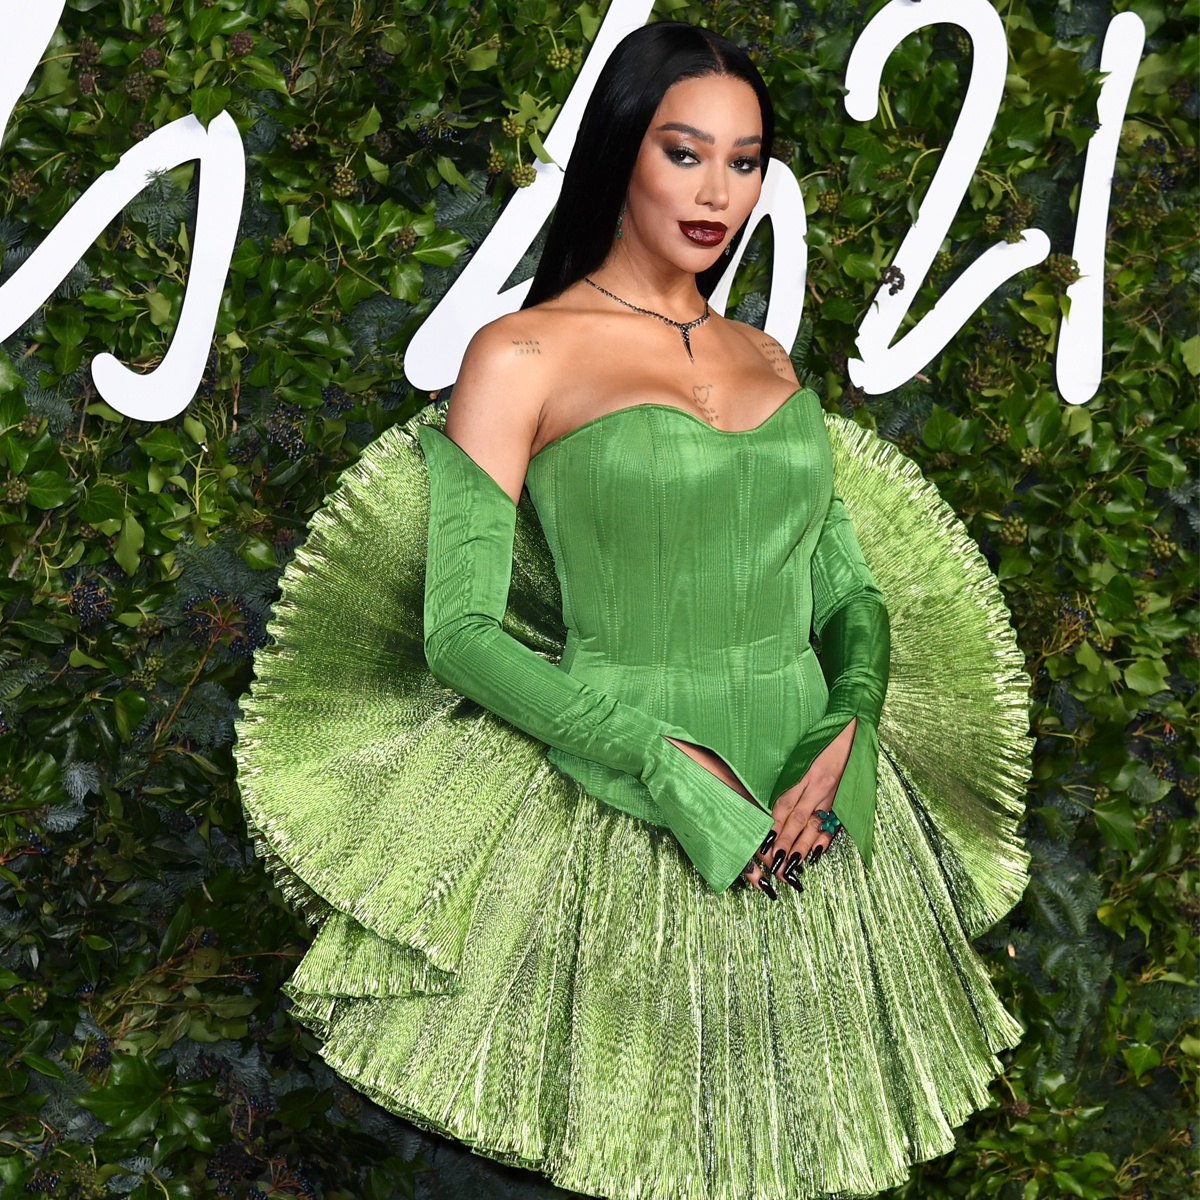 Fashion Awards 2021 Red Carpet: All the looks you need to see